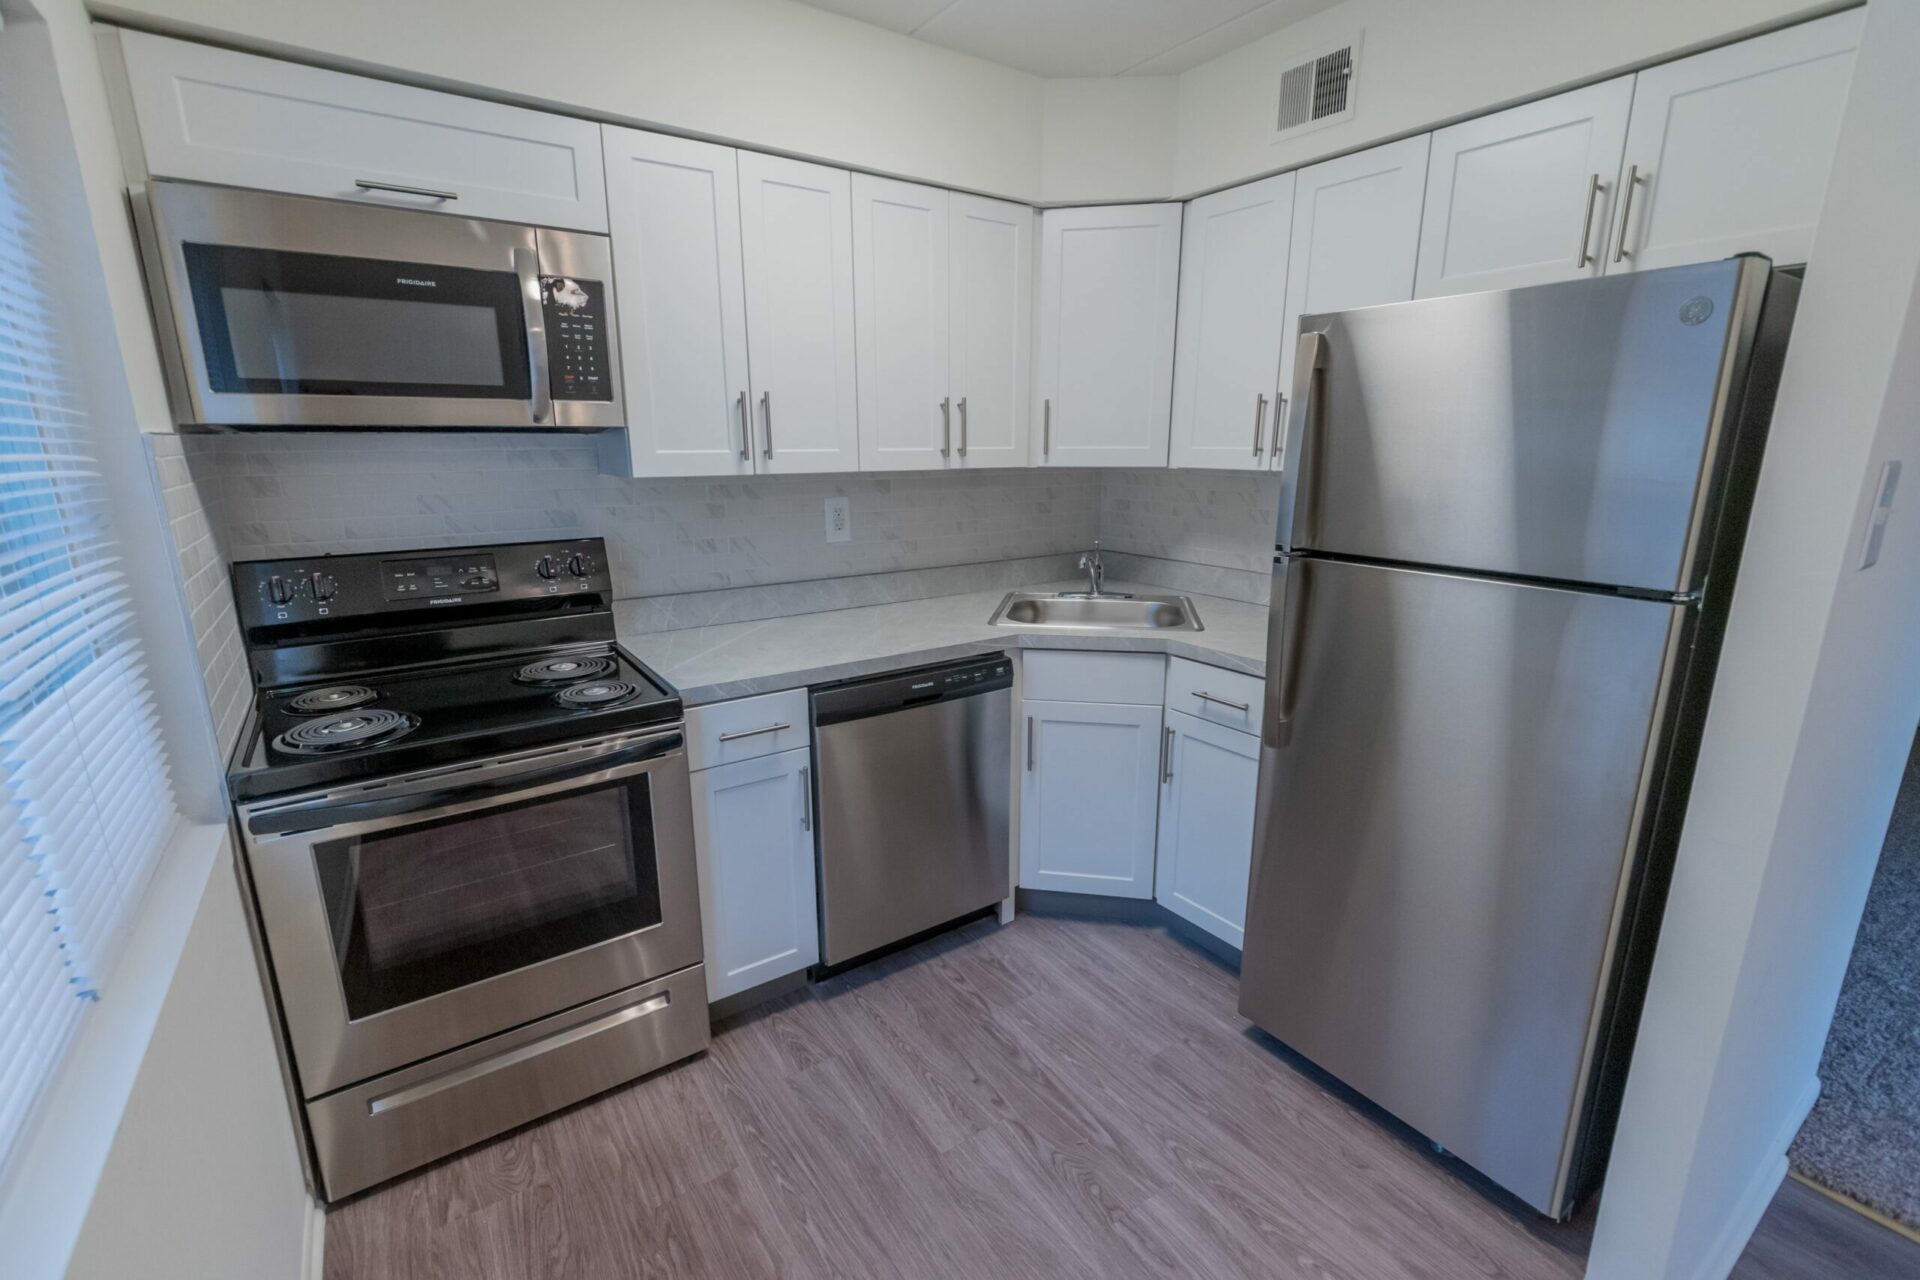 Kitchen area of an apartment, fitted with vinyl flooring, stainless steel appliances, and spacious cabinets